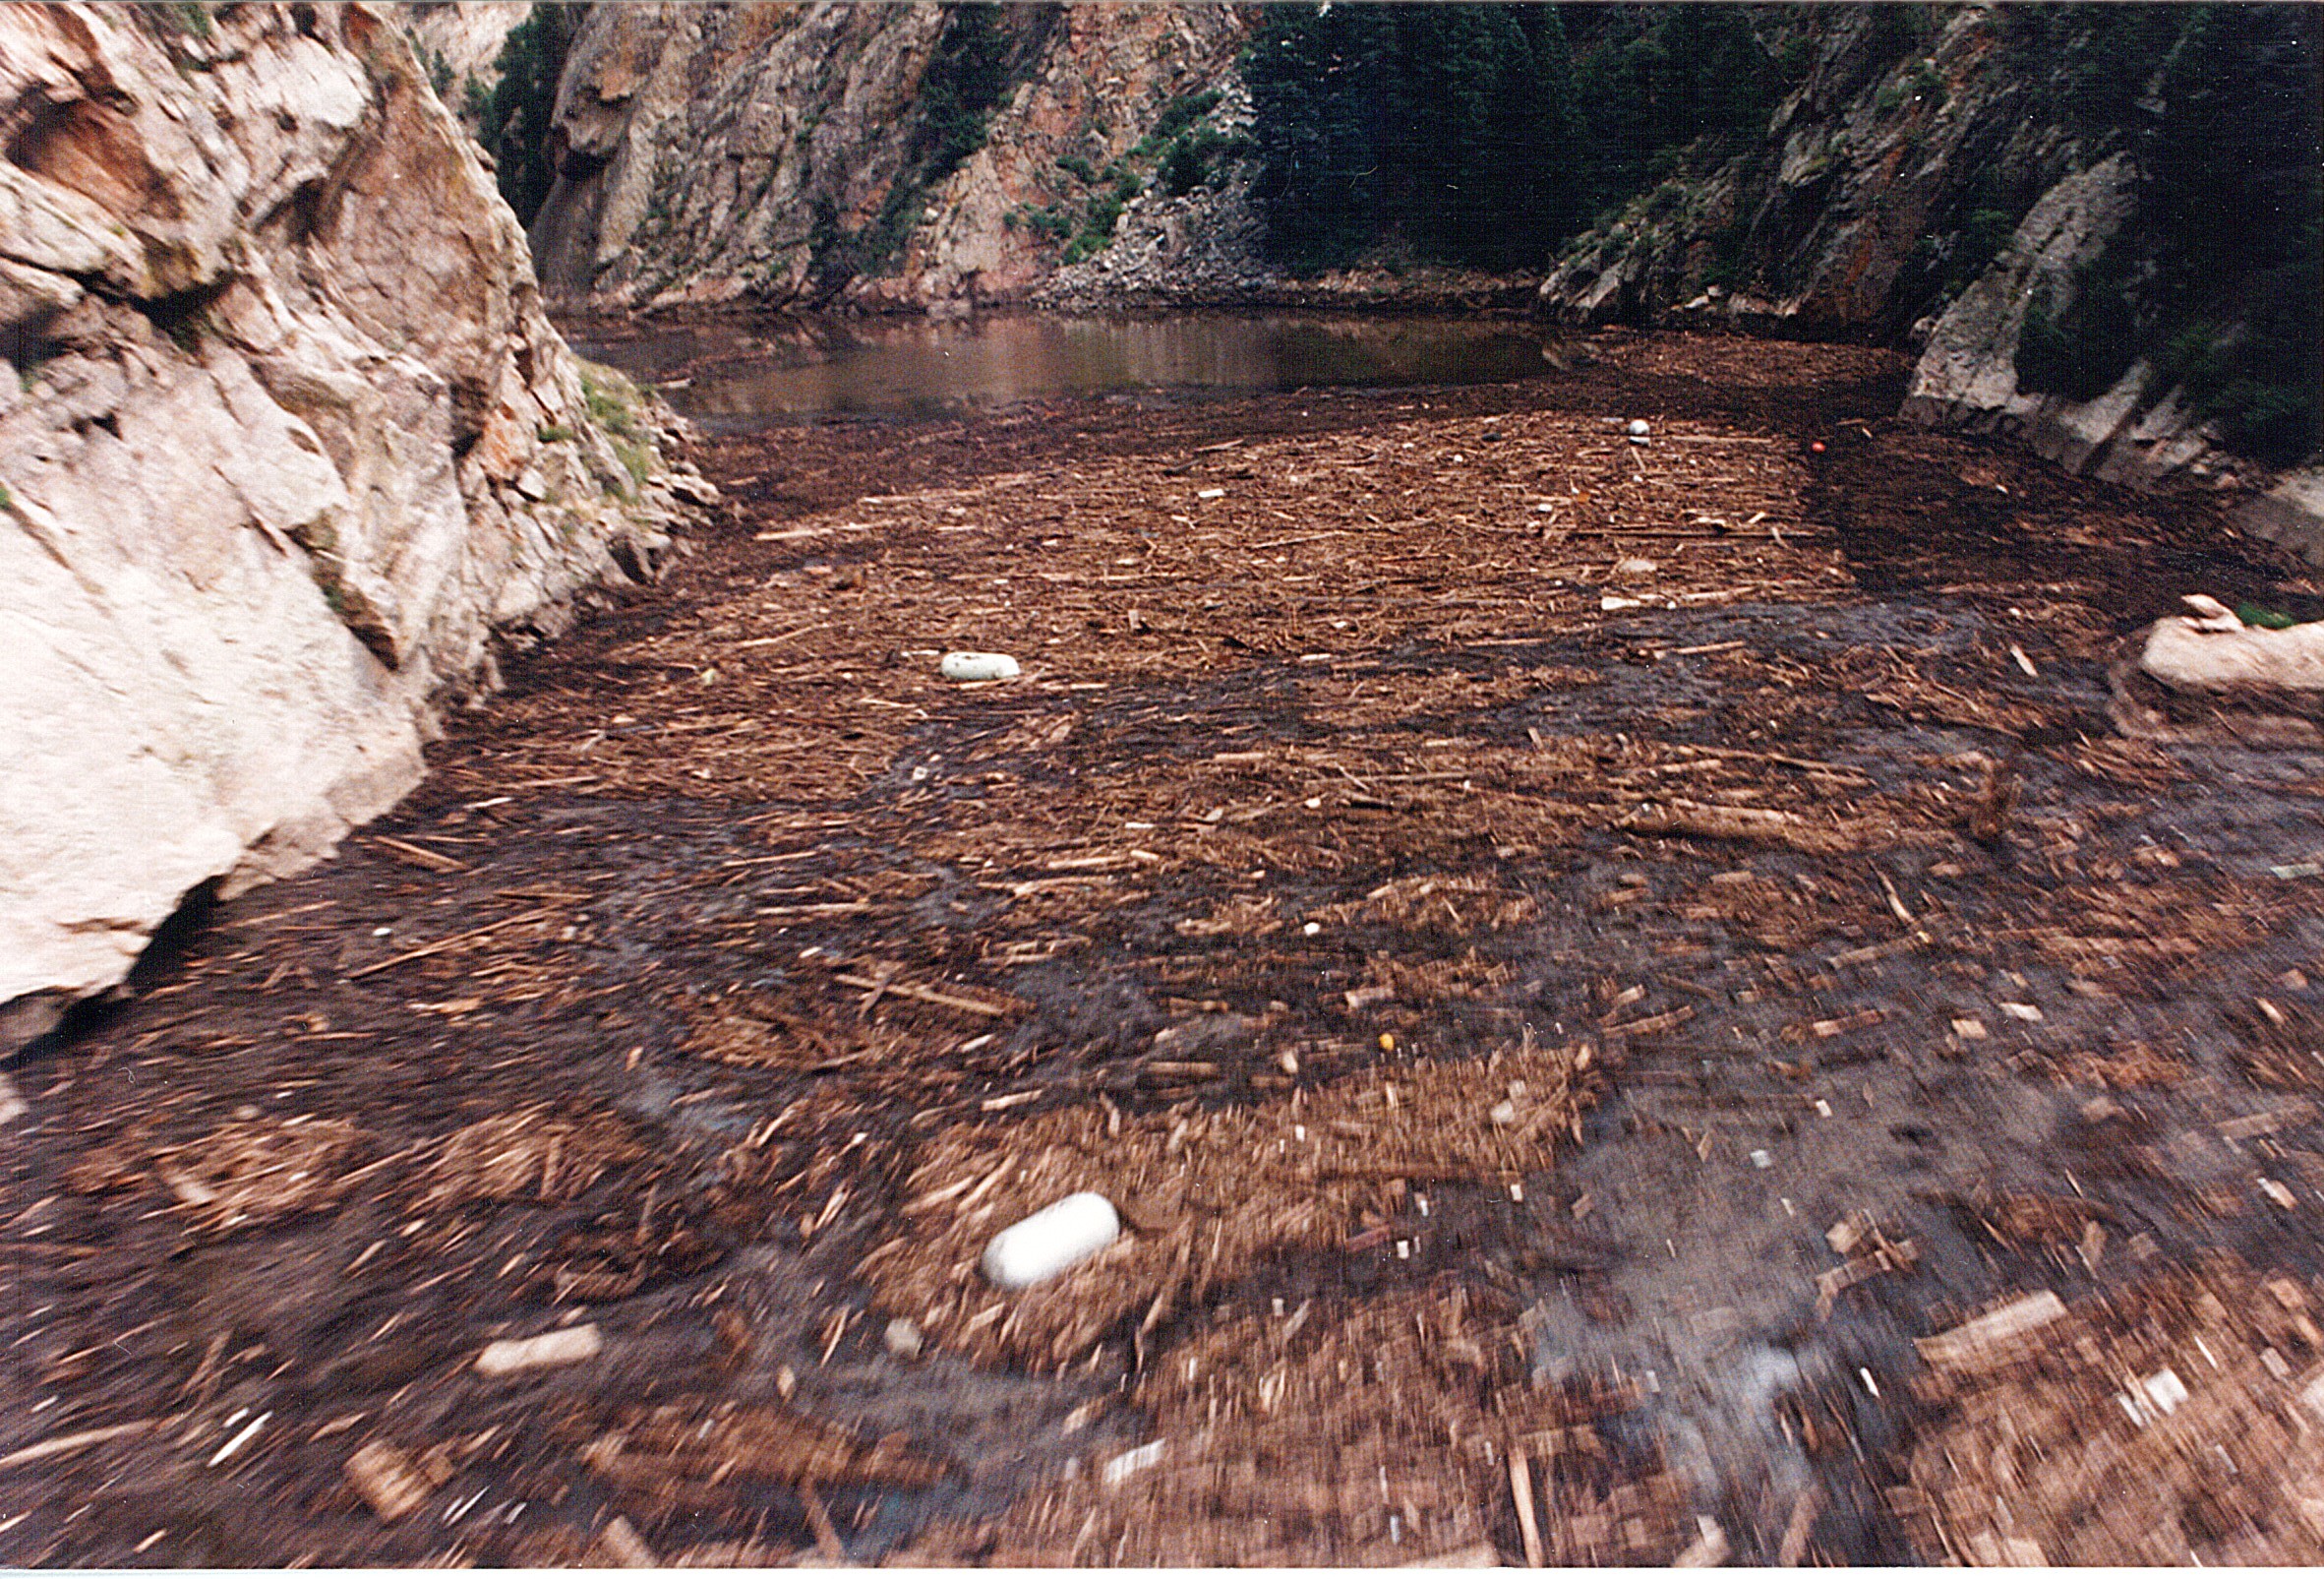 Debris filled Strontia Springs Reservoir after the Buffalo Creek fire and flood of 1996. Photo credit: Denver Water.